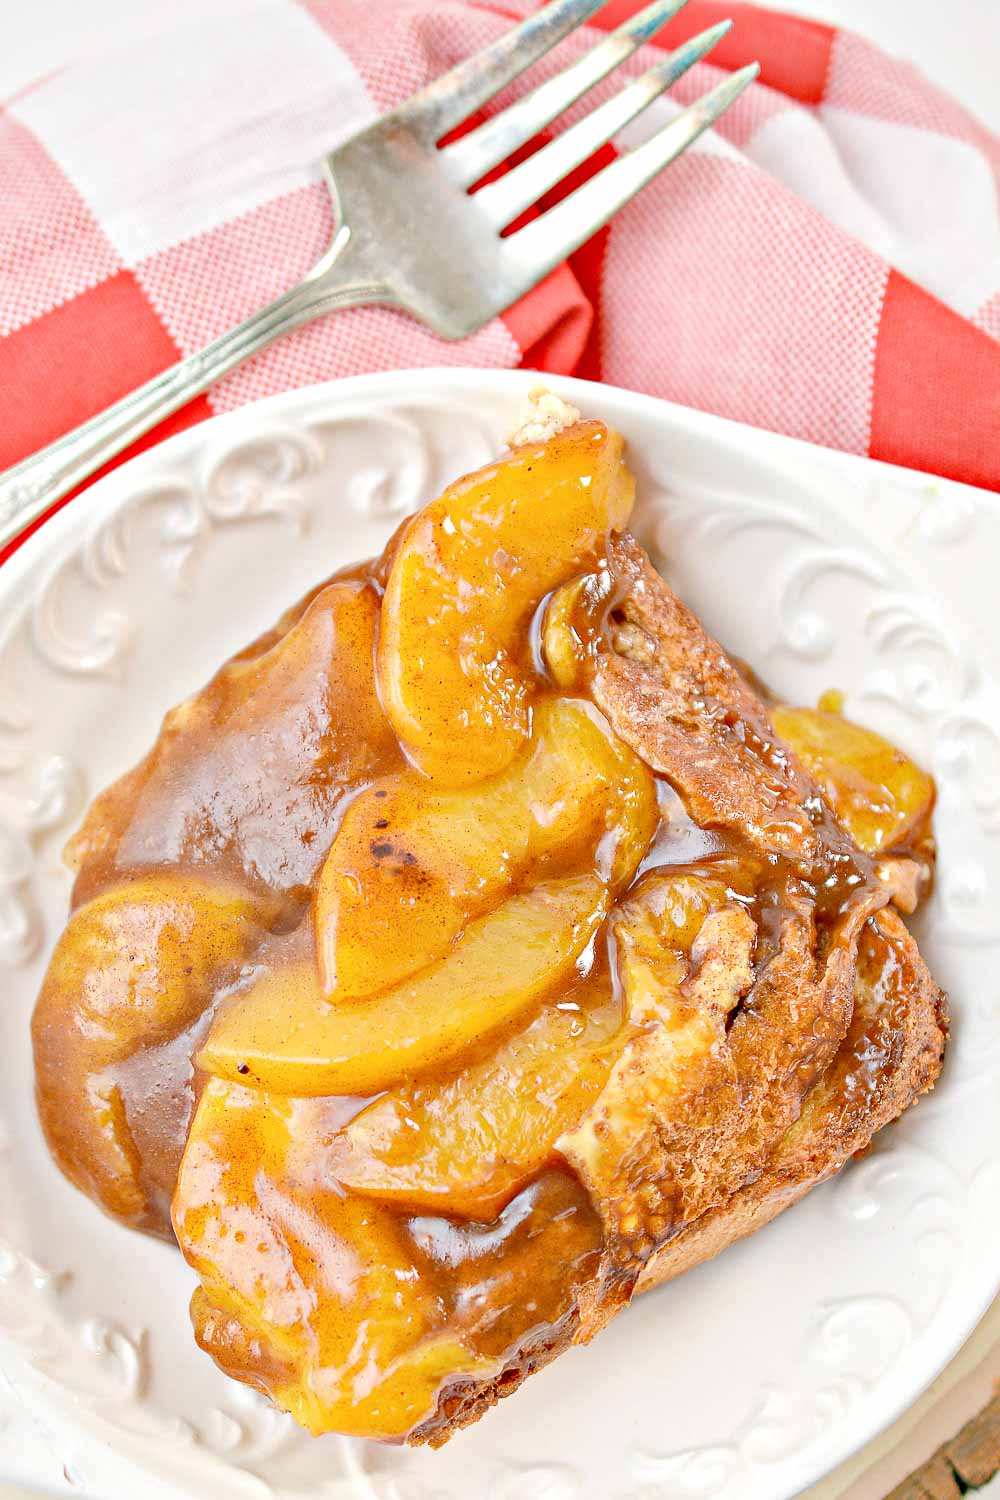 Christmas in the Summer? This Peach Pie French Toast Casserole can be prepared overnight and just popped in the oven in the morning. It's a good recipe to serve to a crowd or brunch!